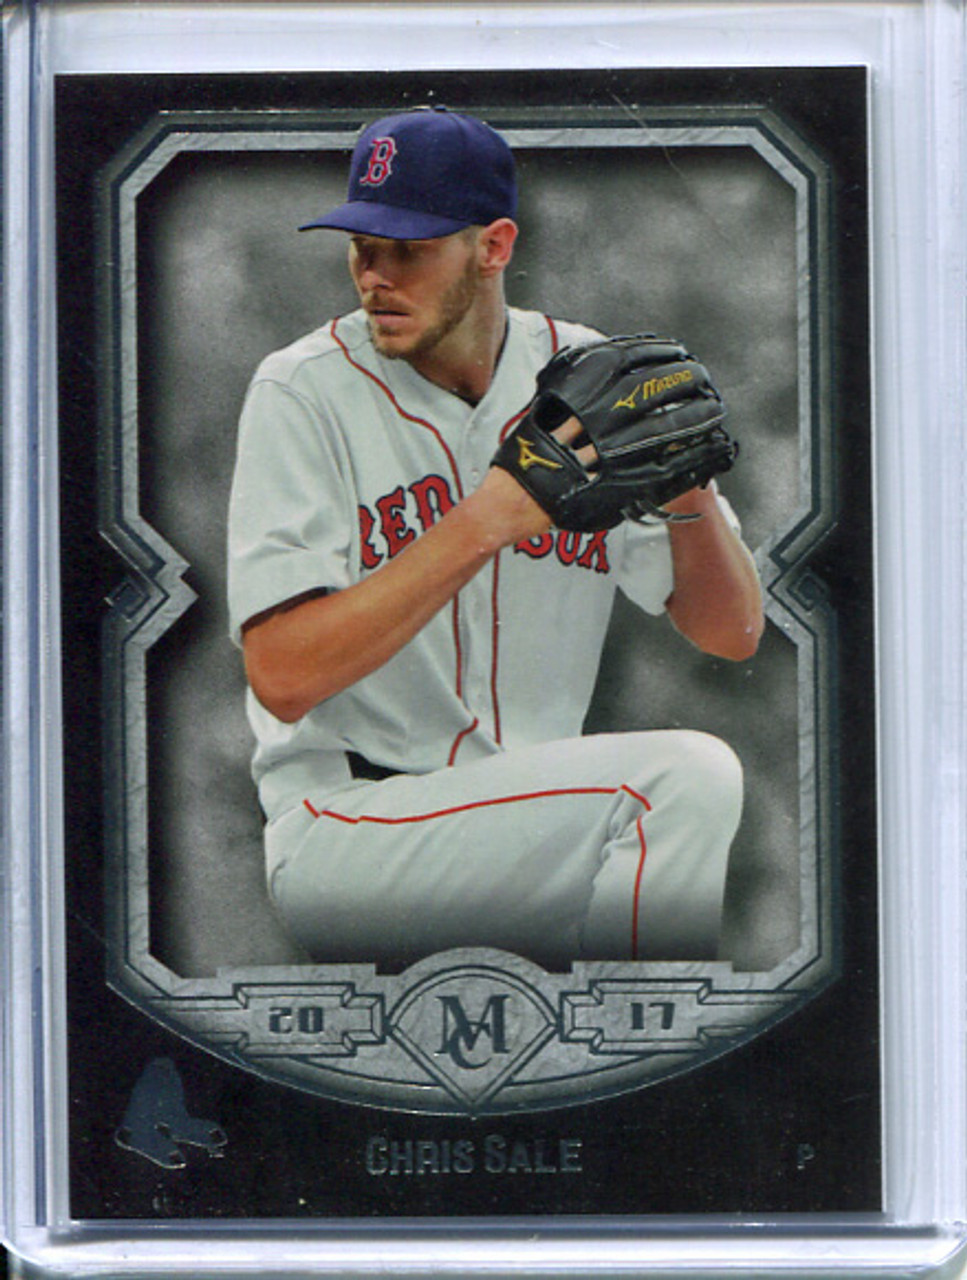 Chris Sale 2017 Museum Collection #33